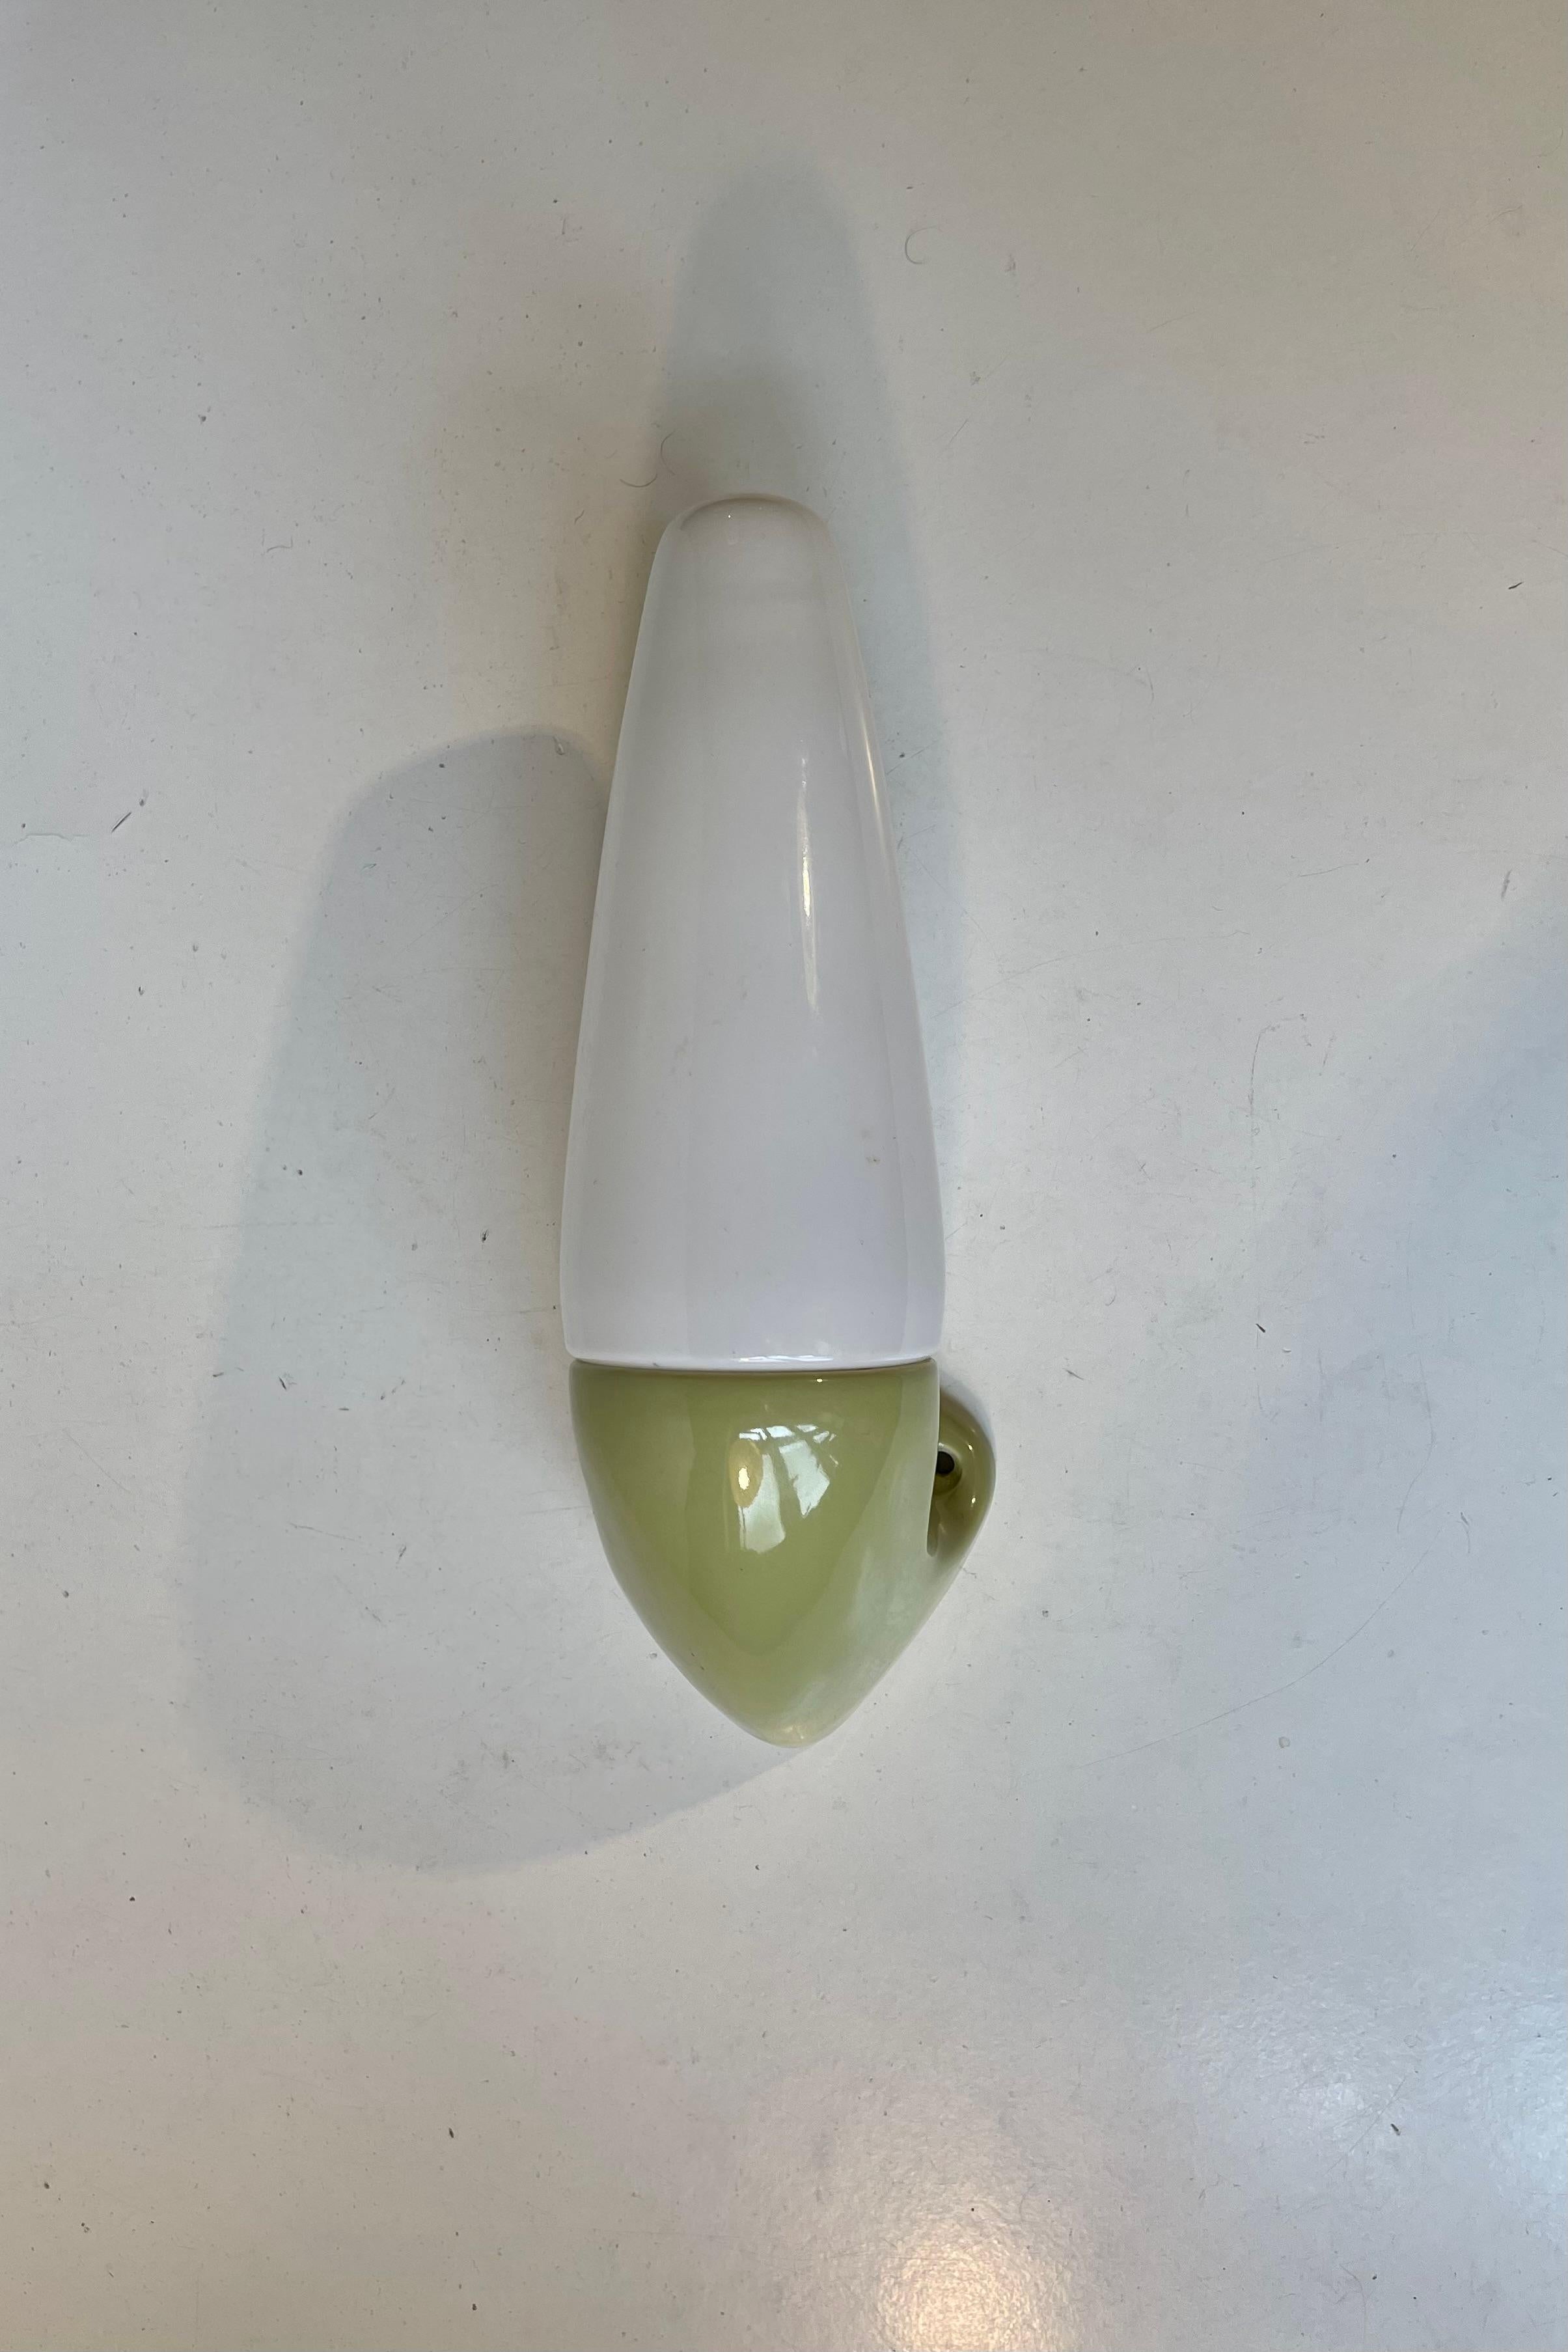 Wall sconce suitable as bathroom or outdoor lighting. Designed by Royalty - Prince Sigvard Bernadotte for the swedish company Ifö during the 1960s. Green/light olive glazed porcelain mount with a white opaline glass shade. 2 way mount - either shade